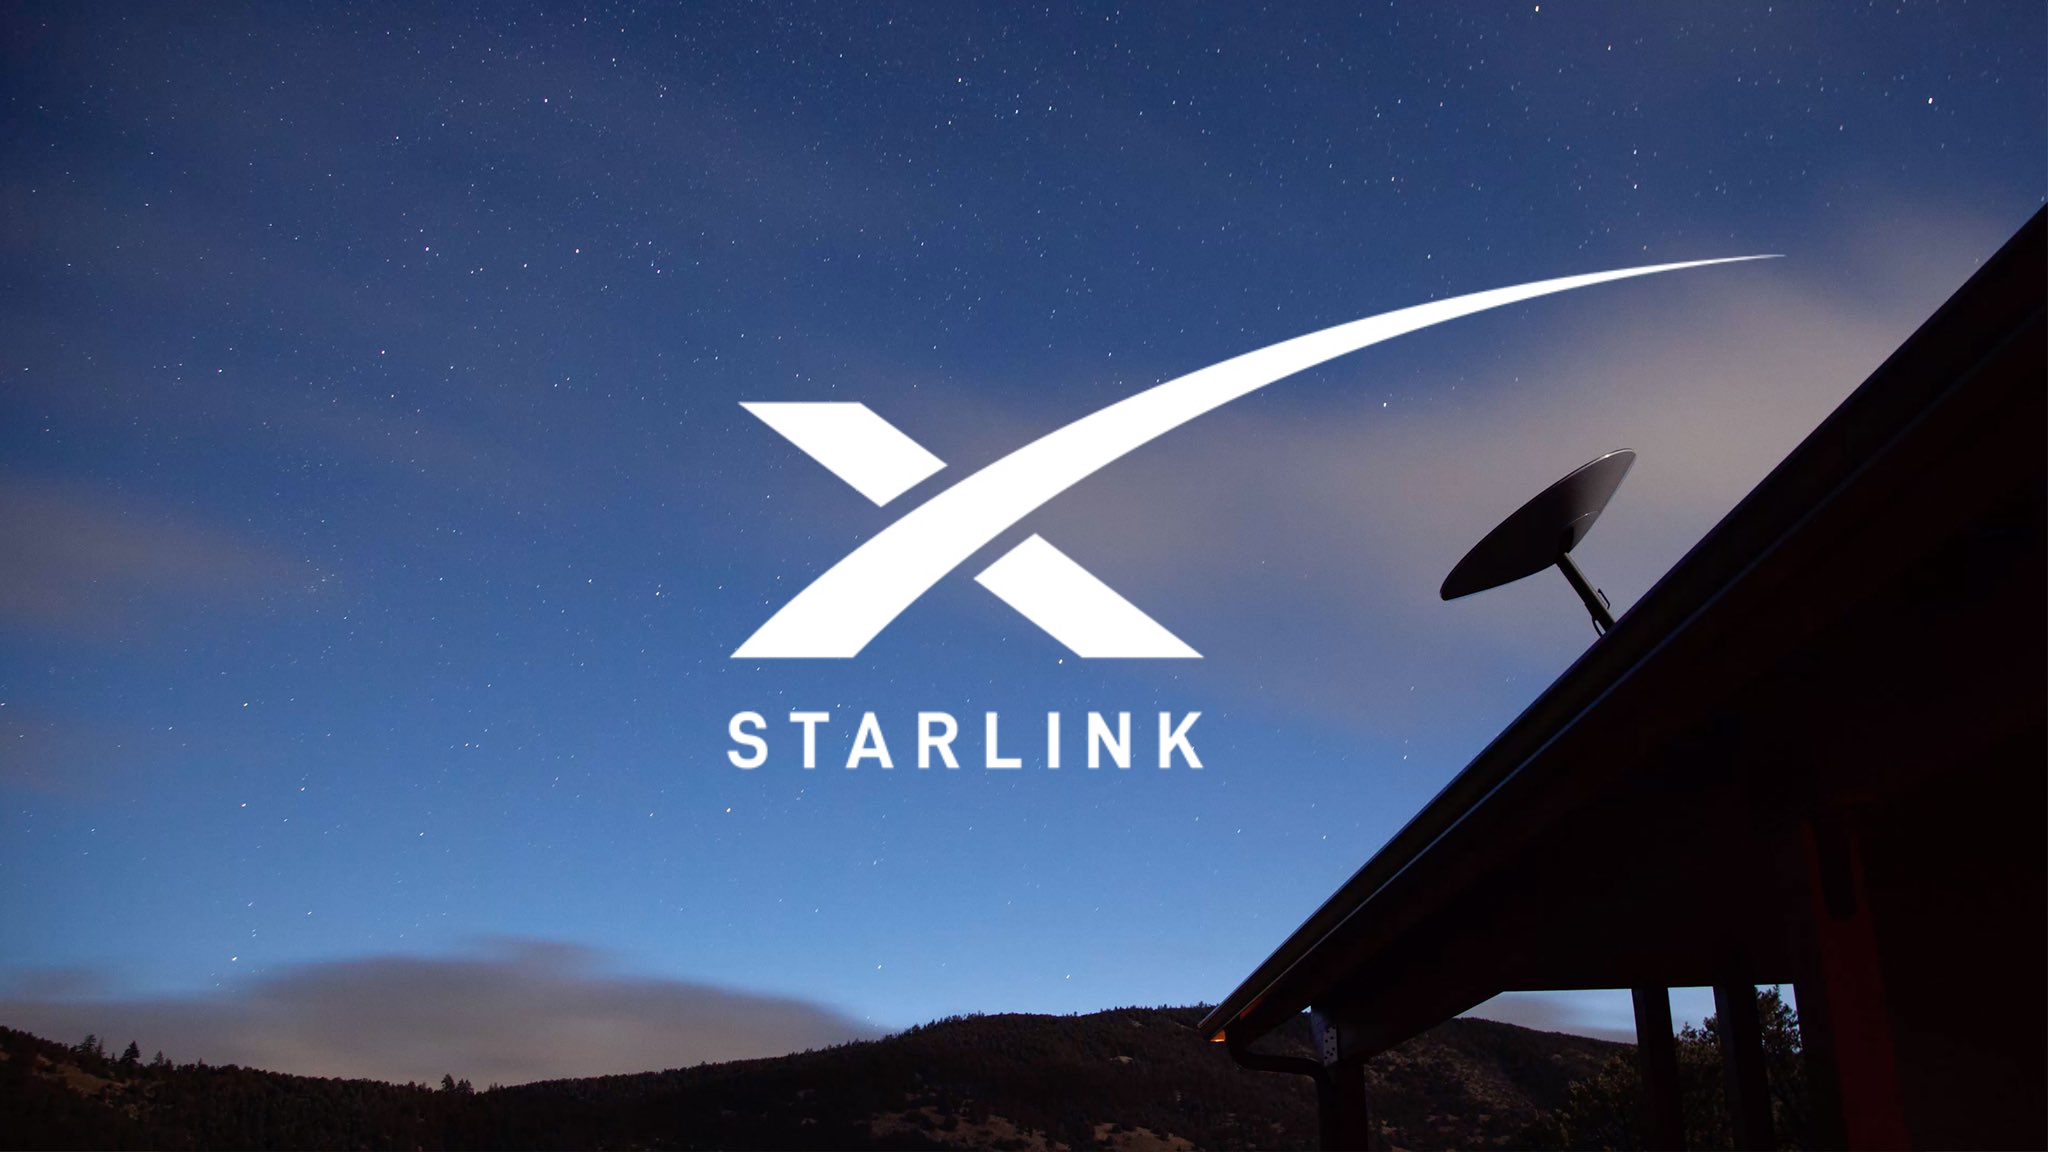 Starlink Beta Testers Share Internet Speeds, SpaceX achieves latency below FCC's 100ms threshold